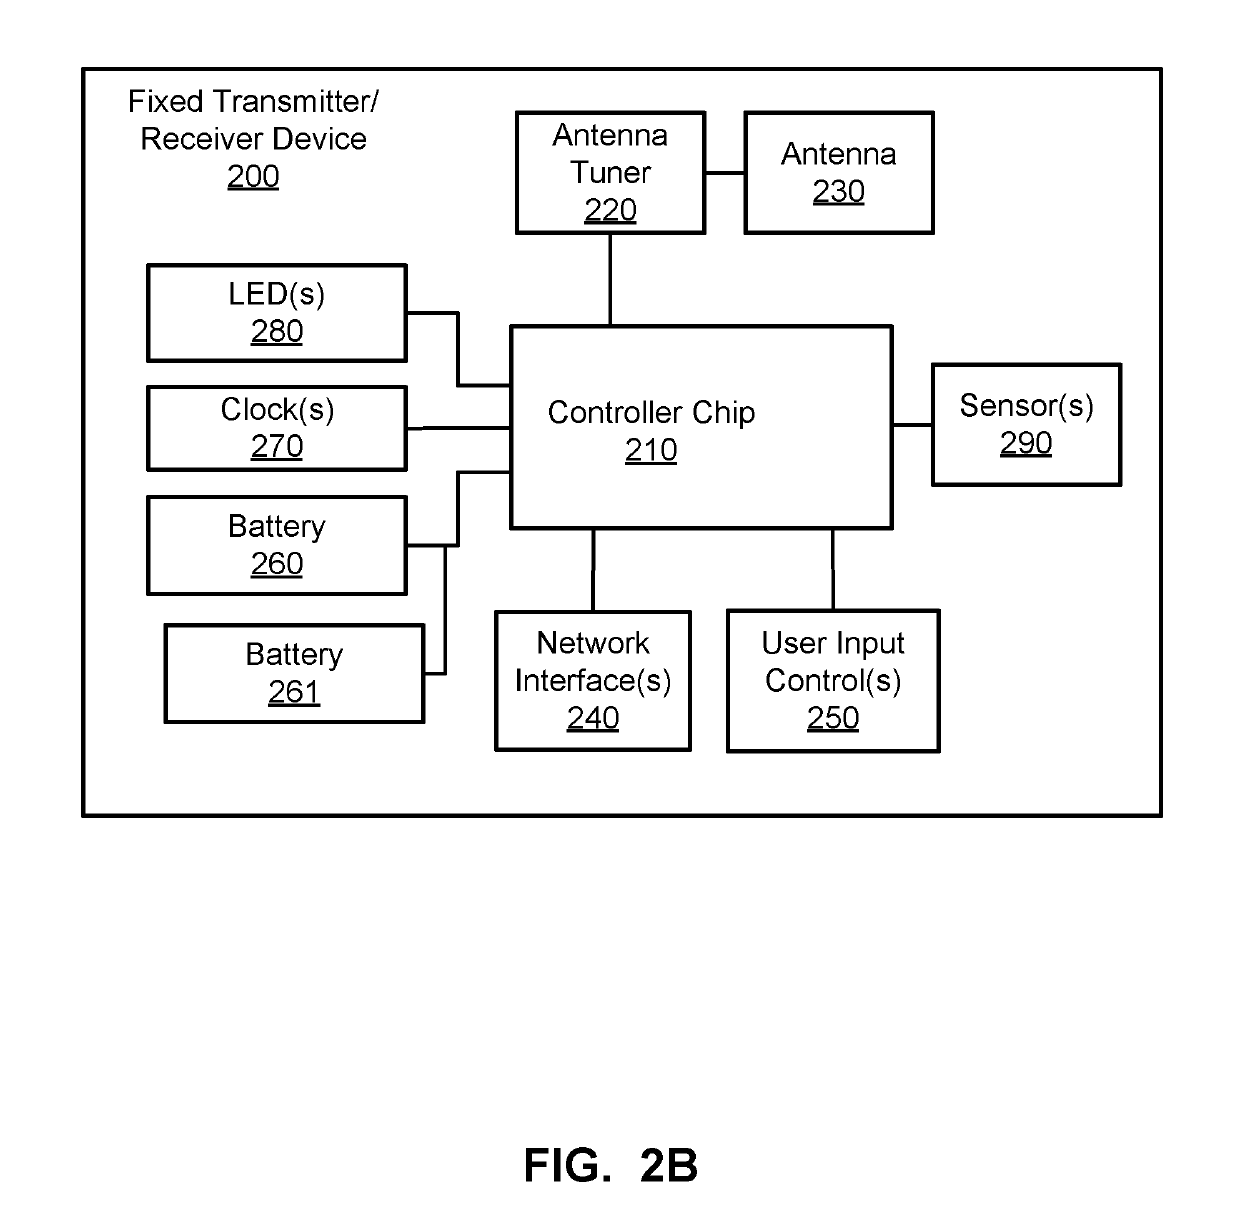 Healthcare asset tracker apparatus and methods